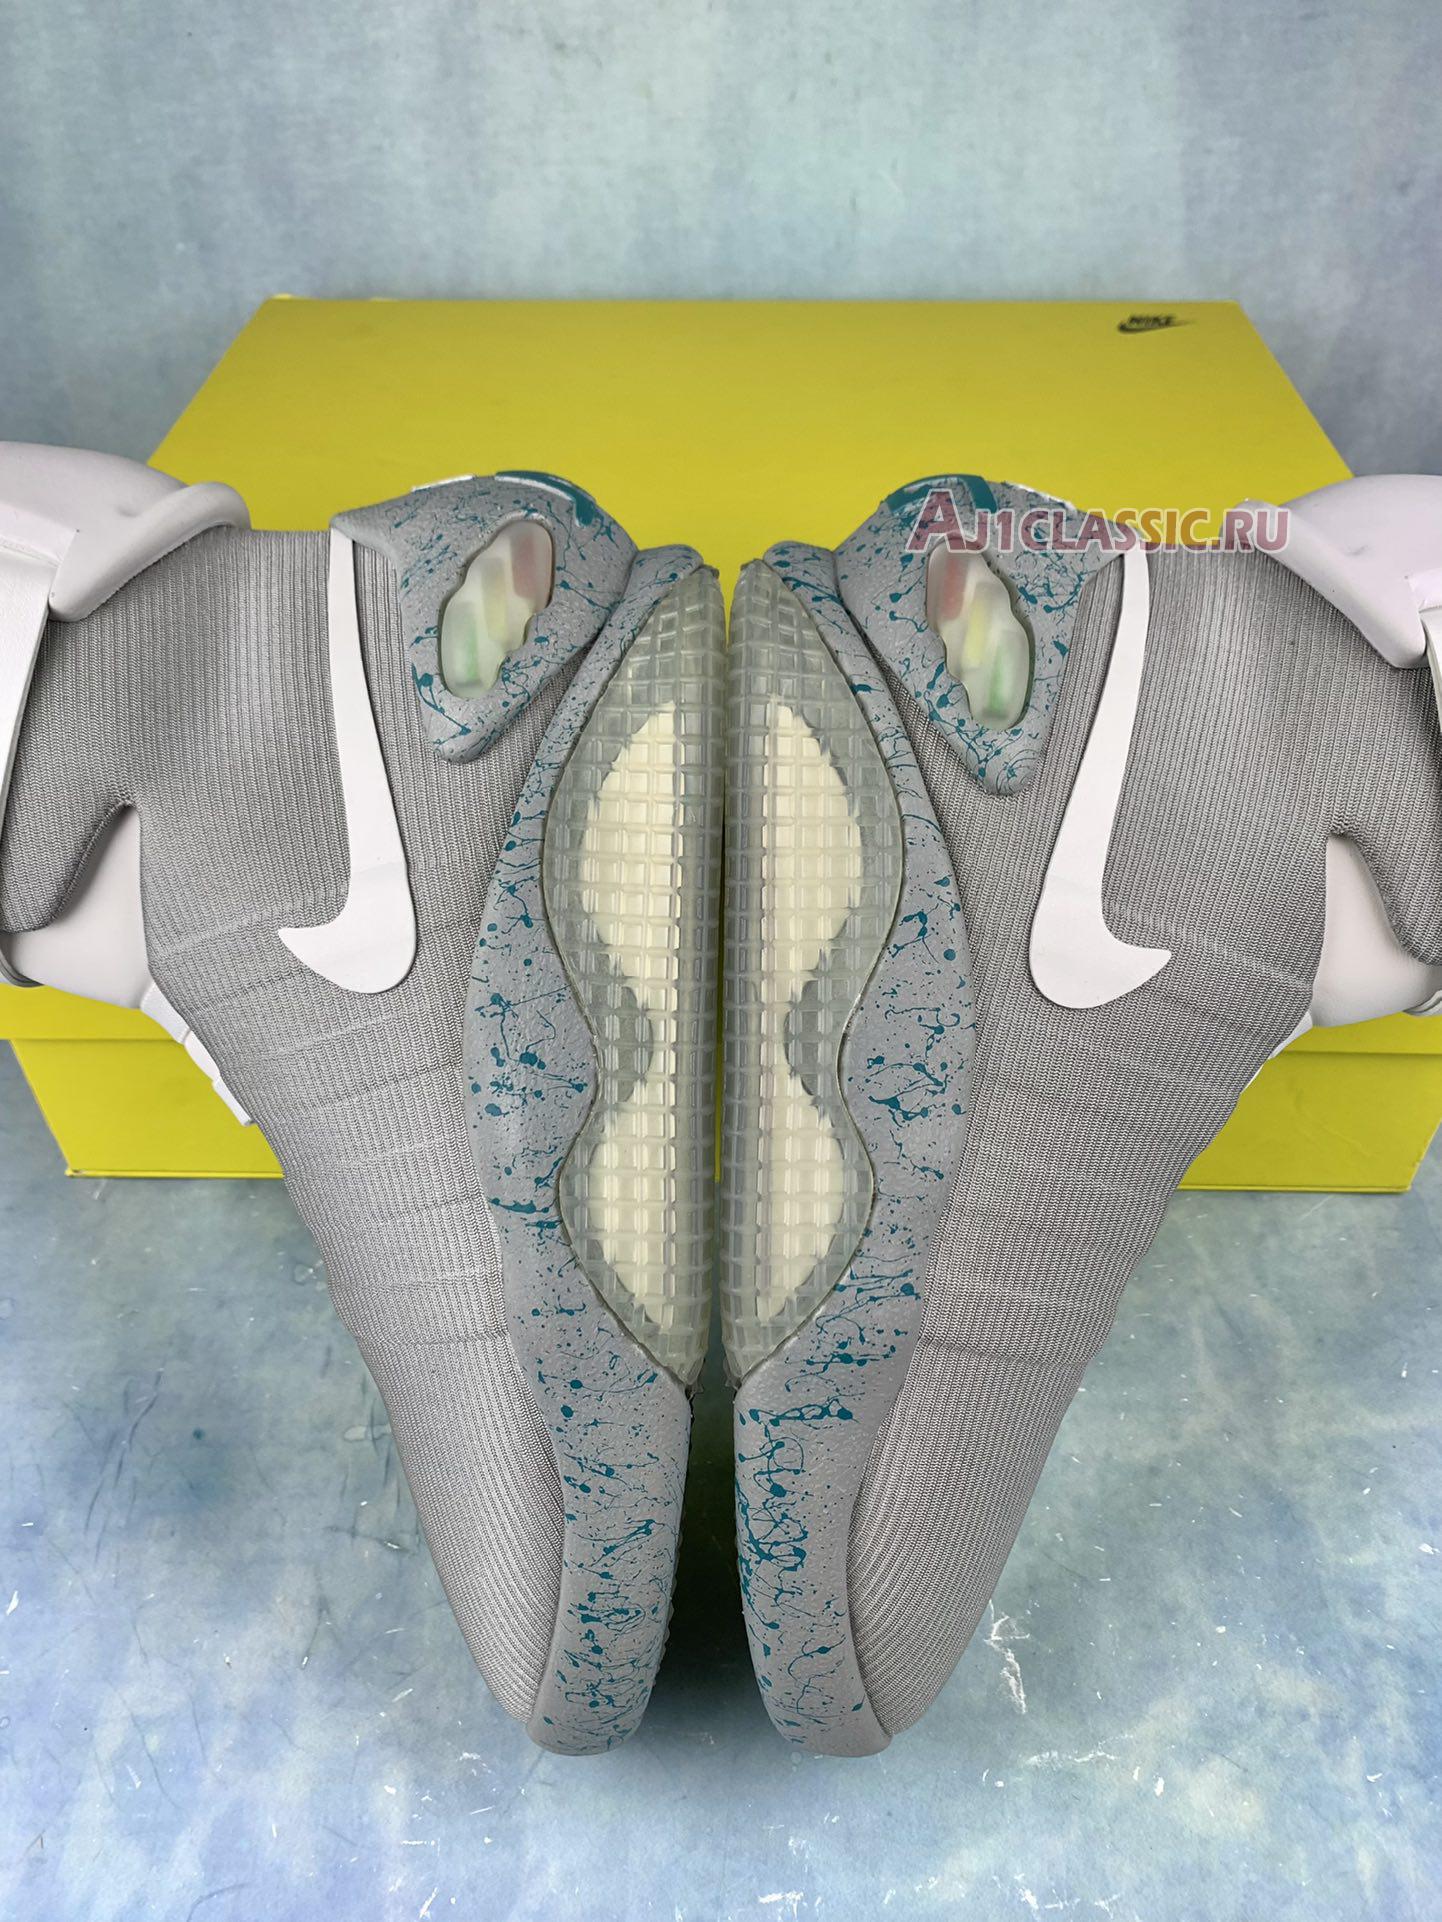 Nike Air Mag "Back To The Future" 417744-001 (Regular)